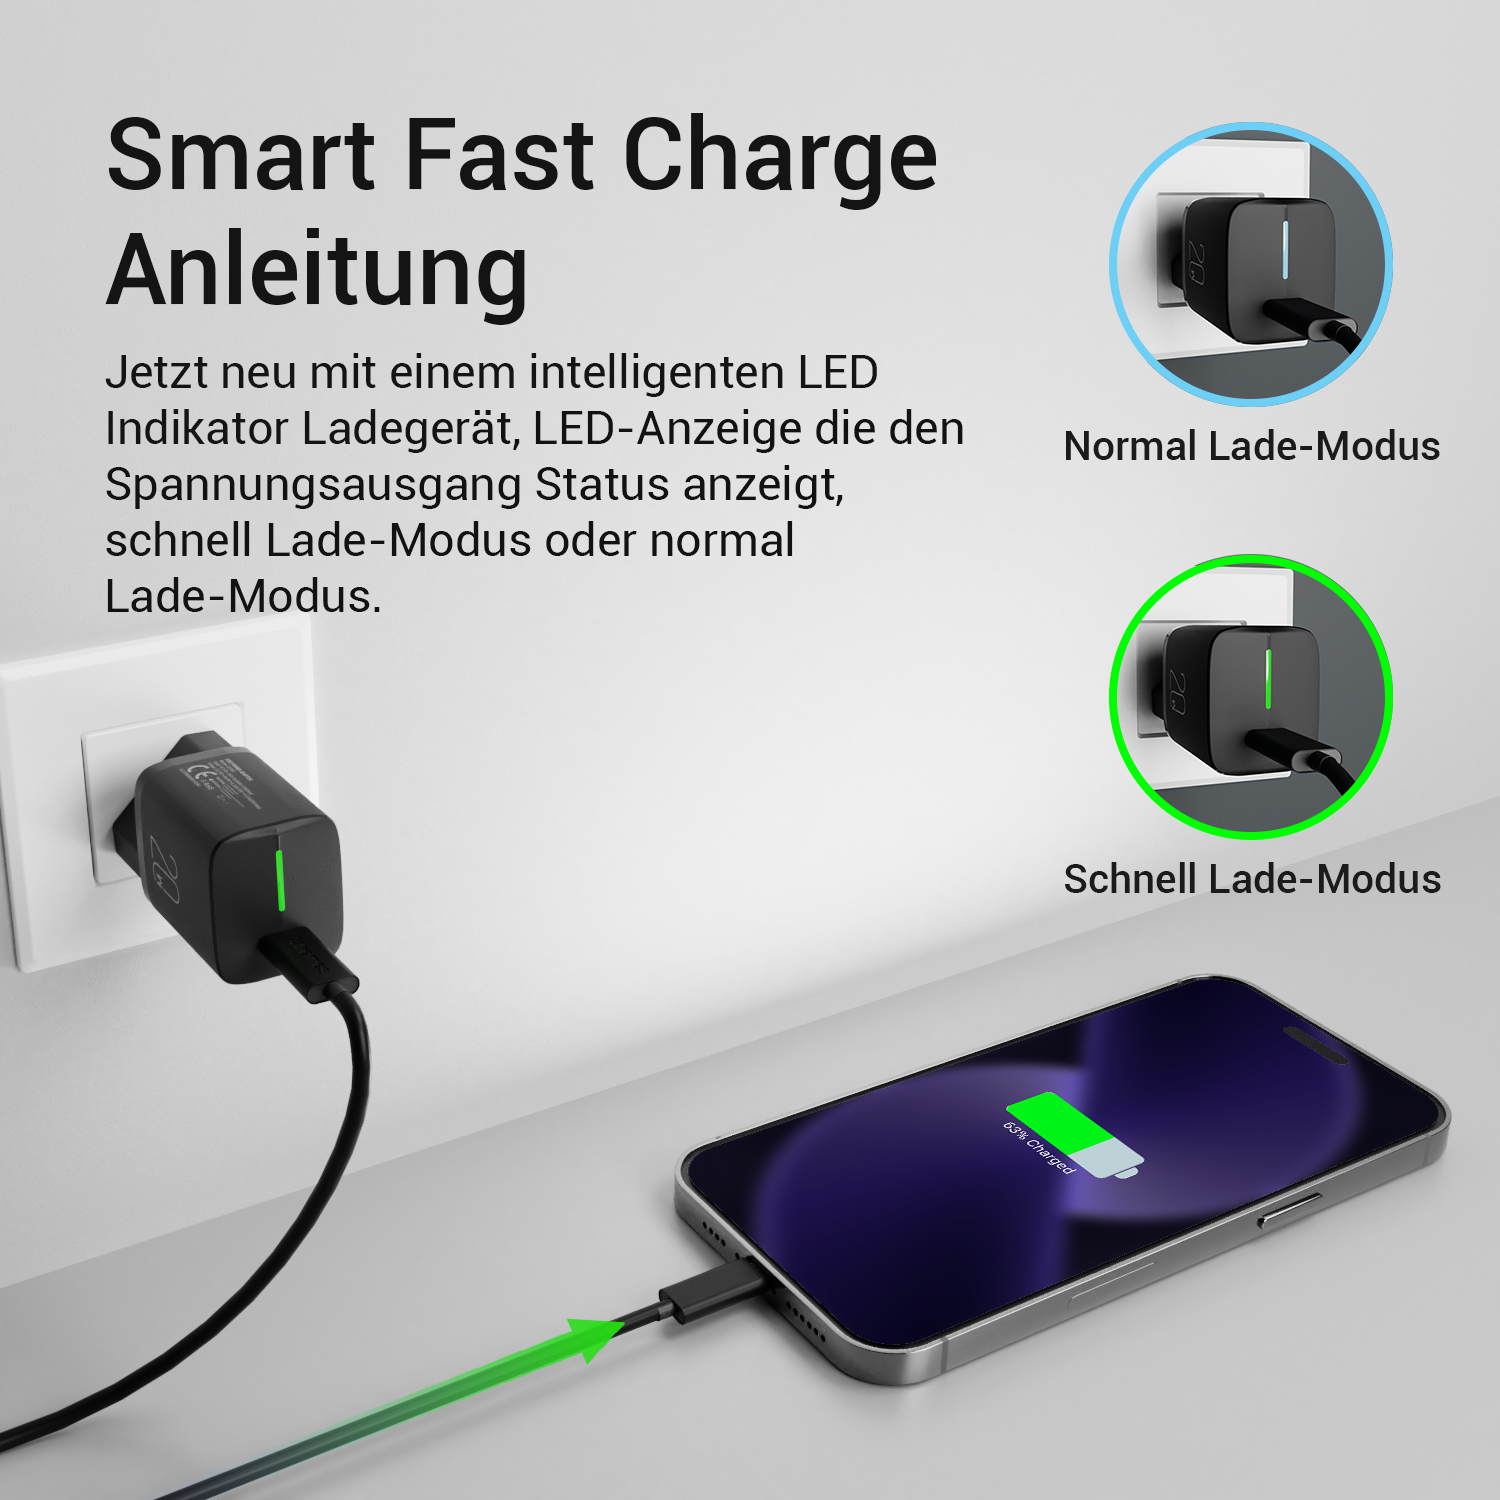 XTREMES Fast Charger (GC08) PD iPhone, Redmi, Ladegerät-Adapter Samsung, Handys, Xiaomi, Apple, Tablets, 20W 3.0 (ohne White Smartwatches, Kabel)